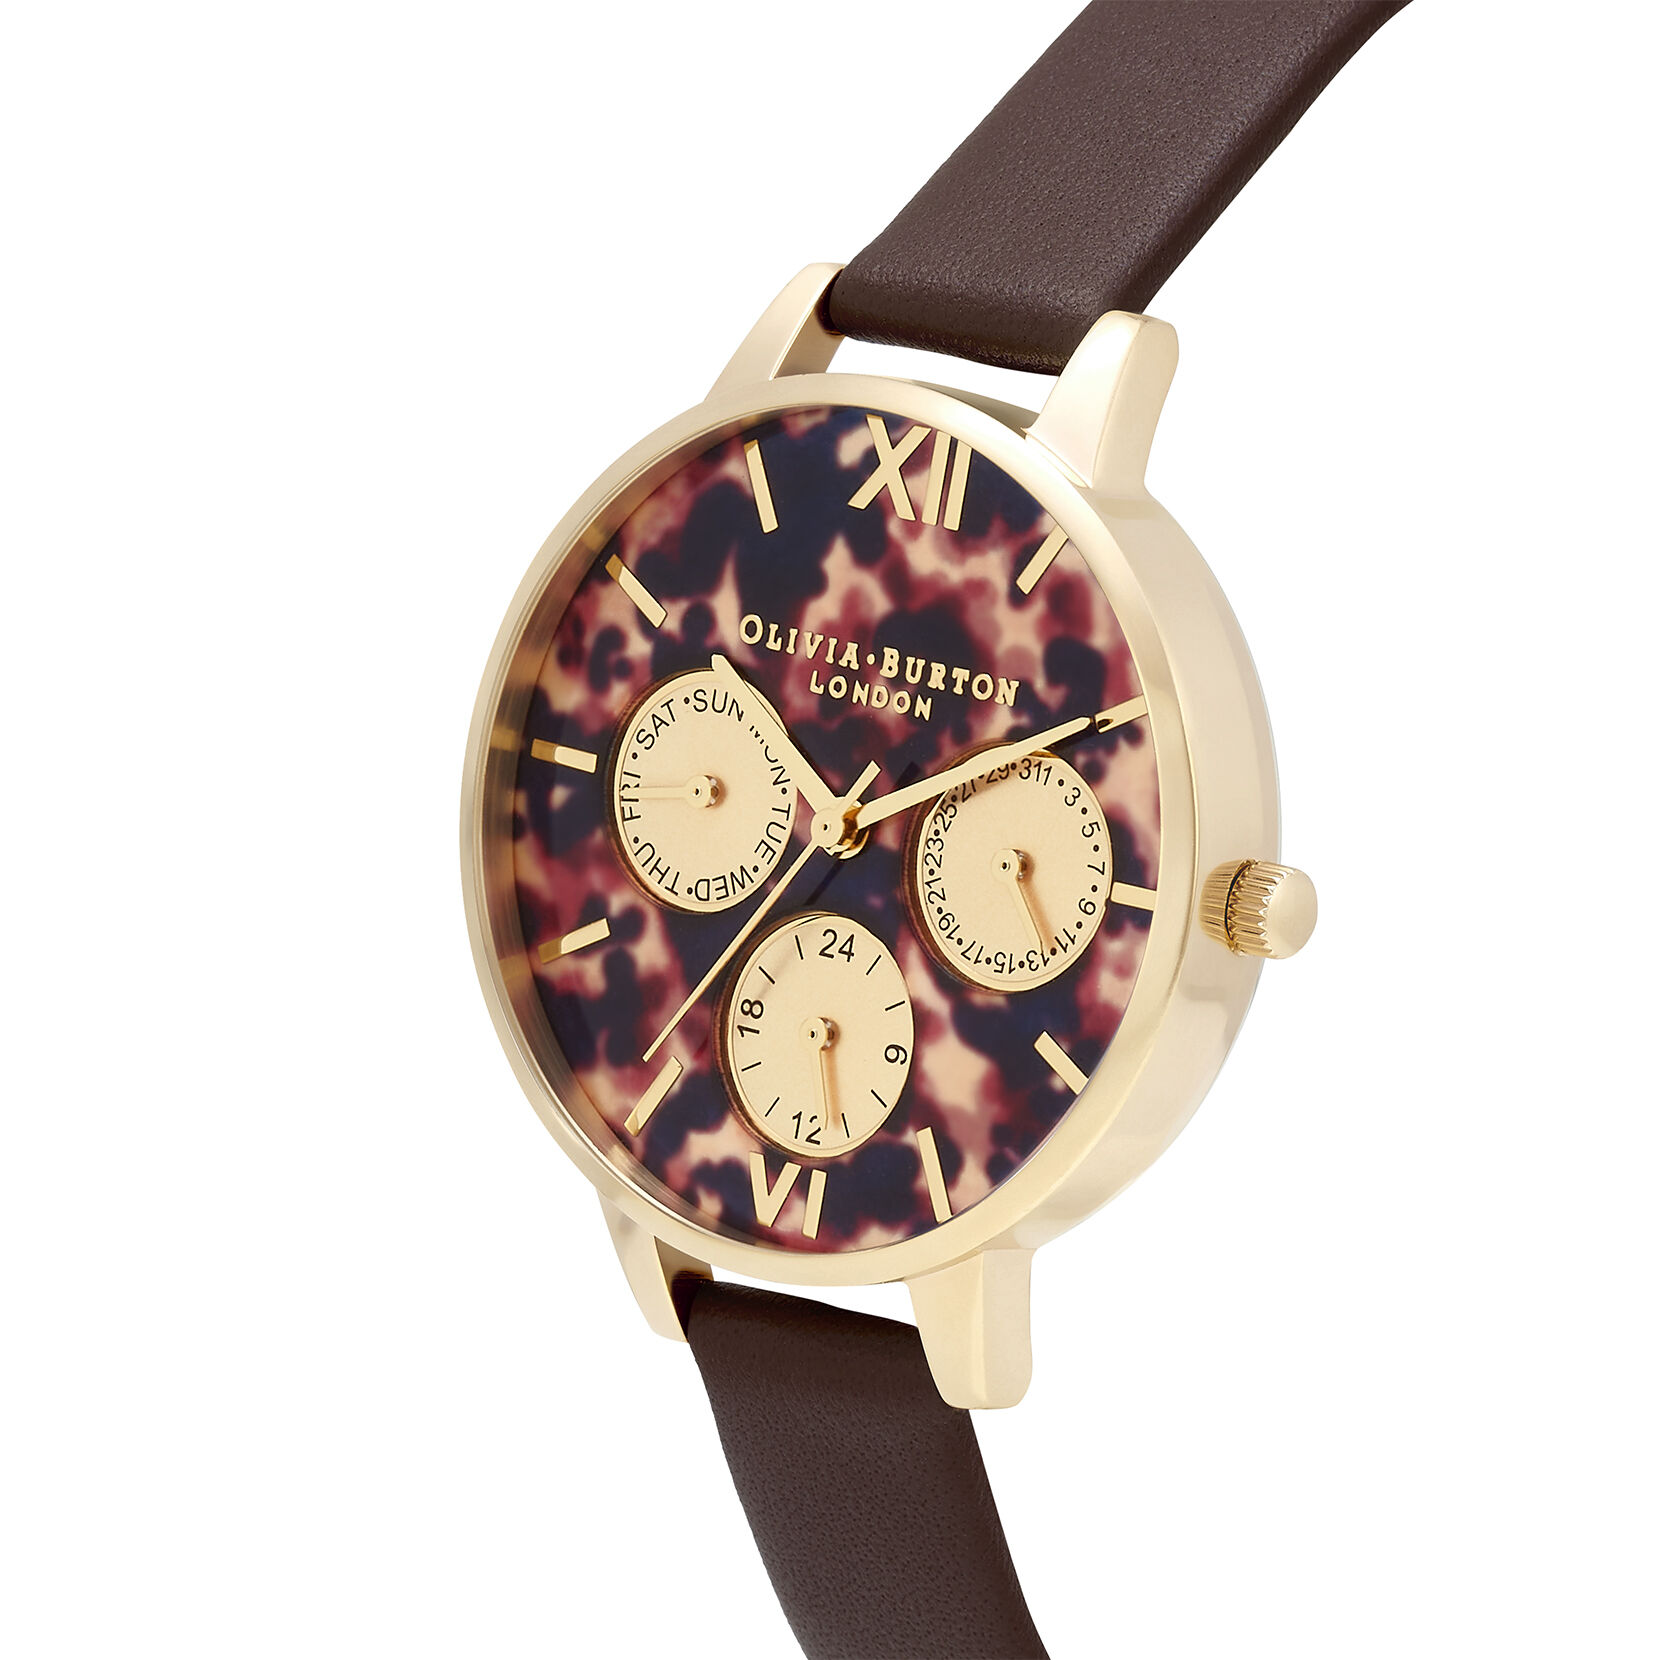 34mm Gold & Brown Leather Strap Watch